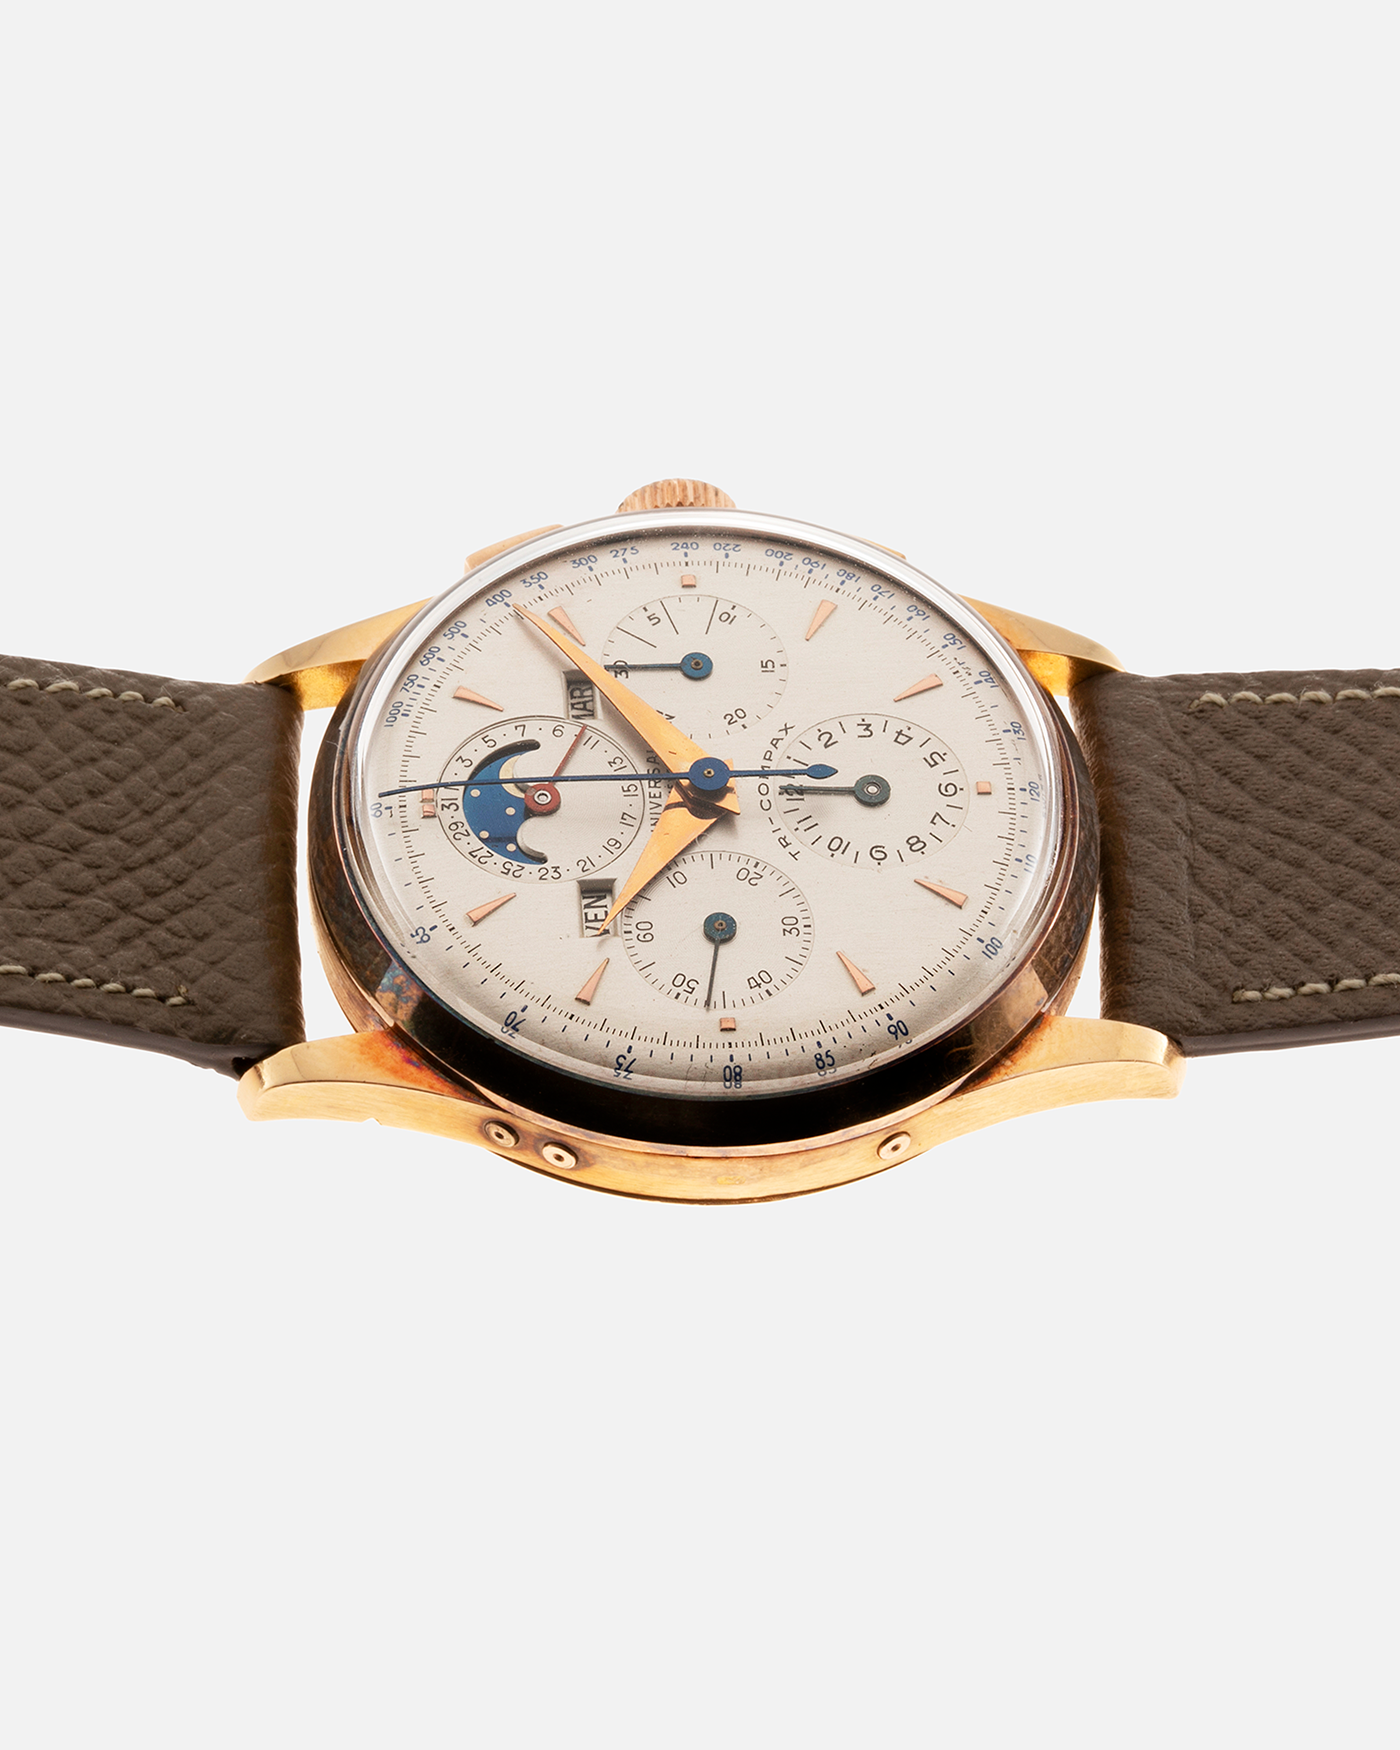 Brand: Universal Genève Year: 1950’s Reference Number: 12295 Material: 18-carat Yellow Gold Movement: Cal. 481, Manual-Winding Case Diameter: 35mm Strap: Nostime Taupe Textured Calf Strap with Generic Stainless Steel Tang Buckle